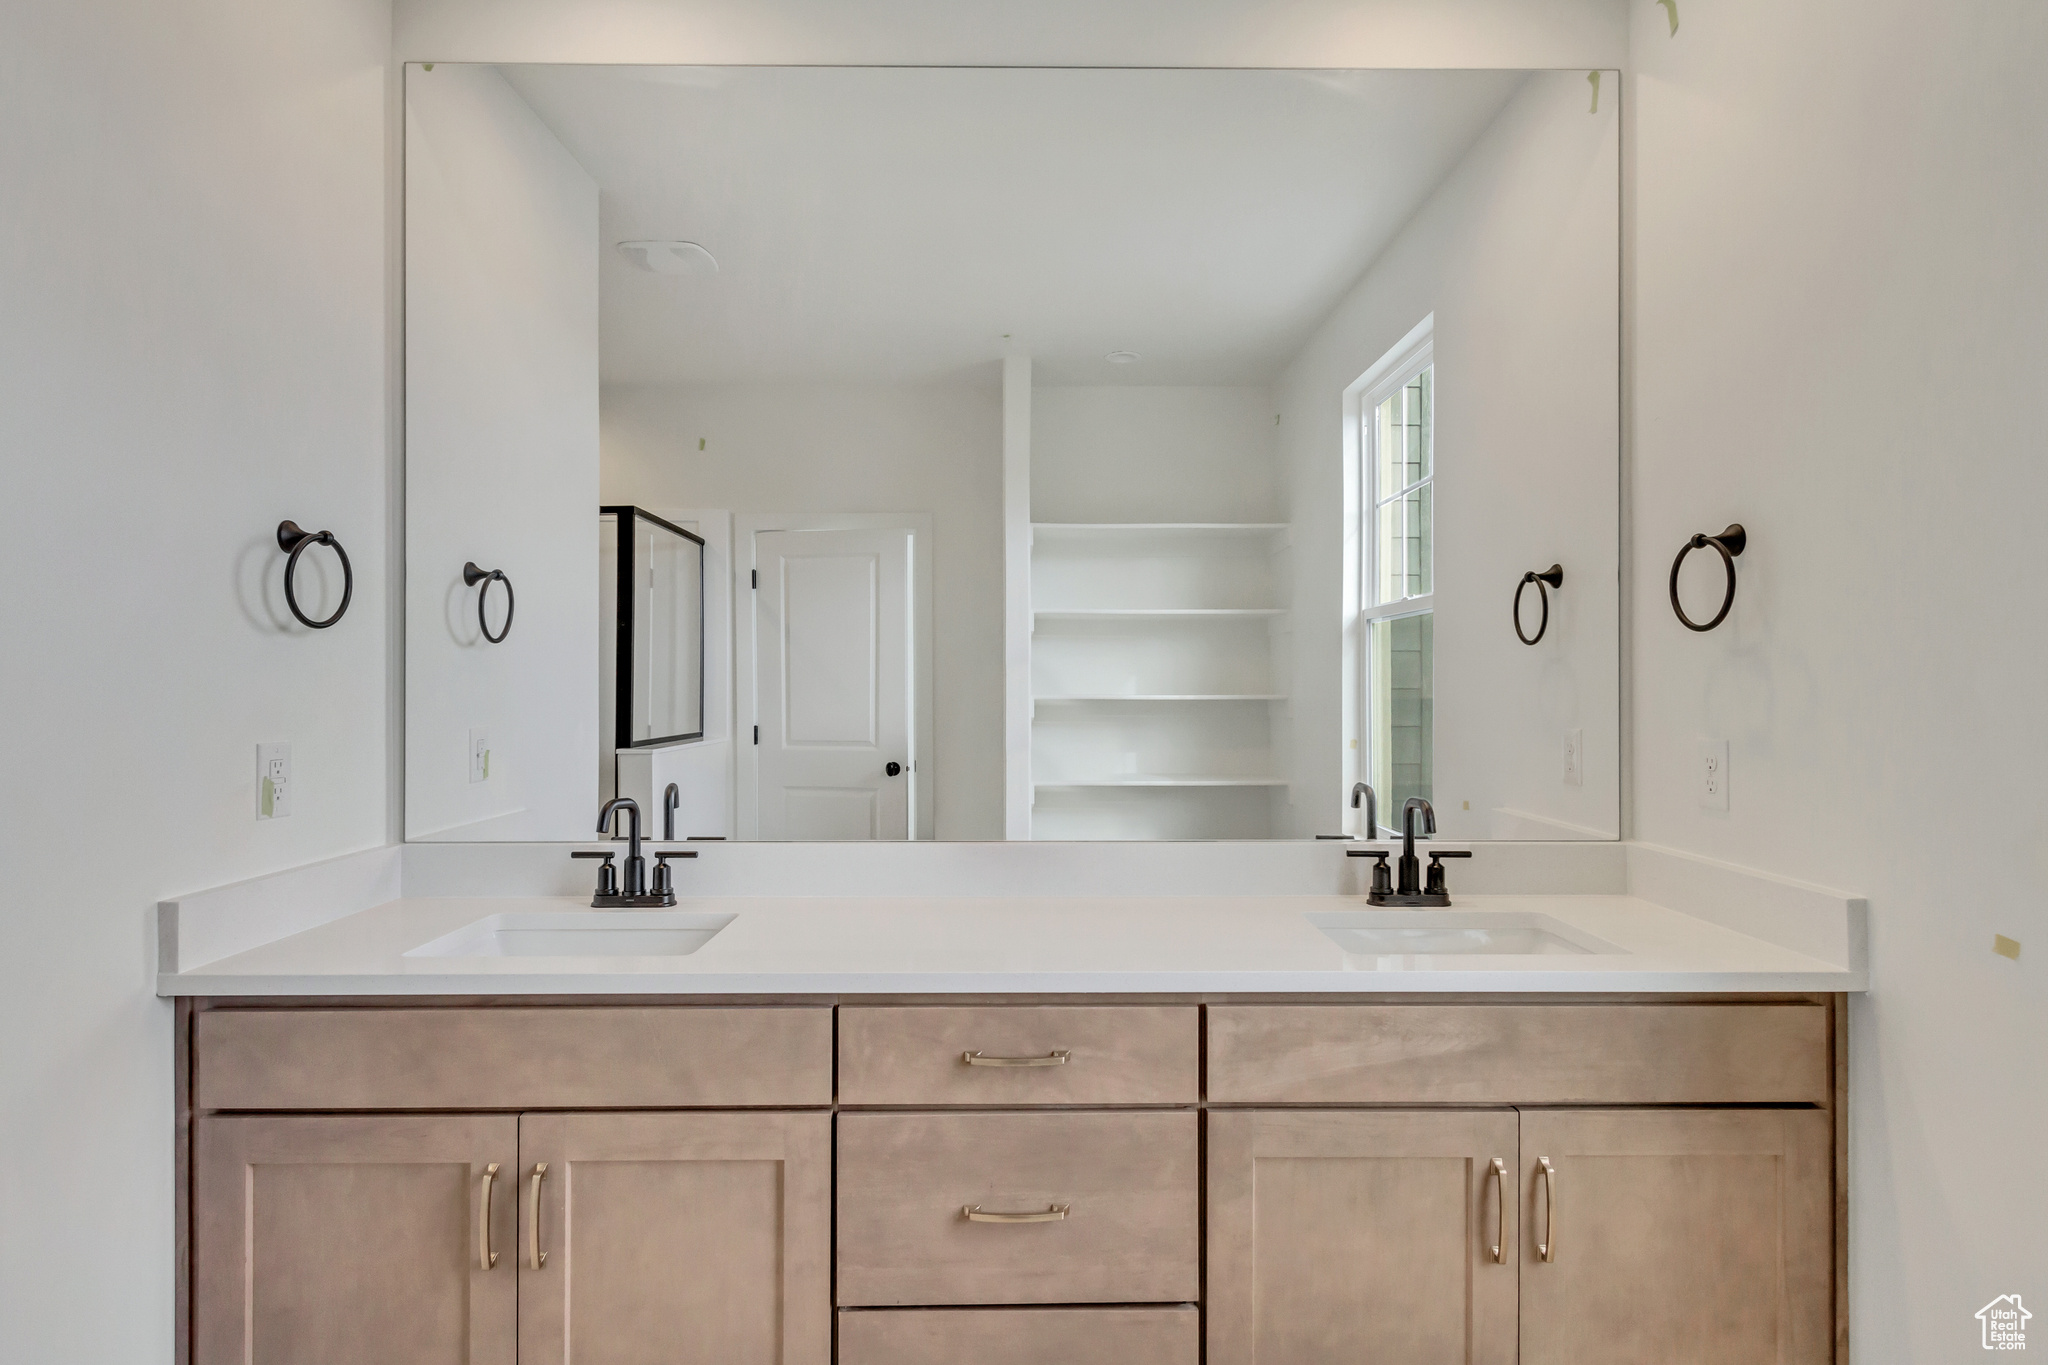 Bathroom featuring dual sinks, oversized vanity, and built in shelves